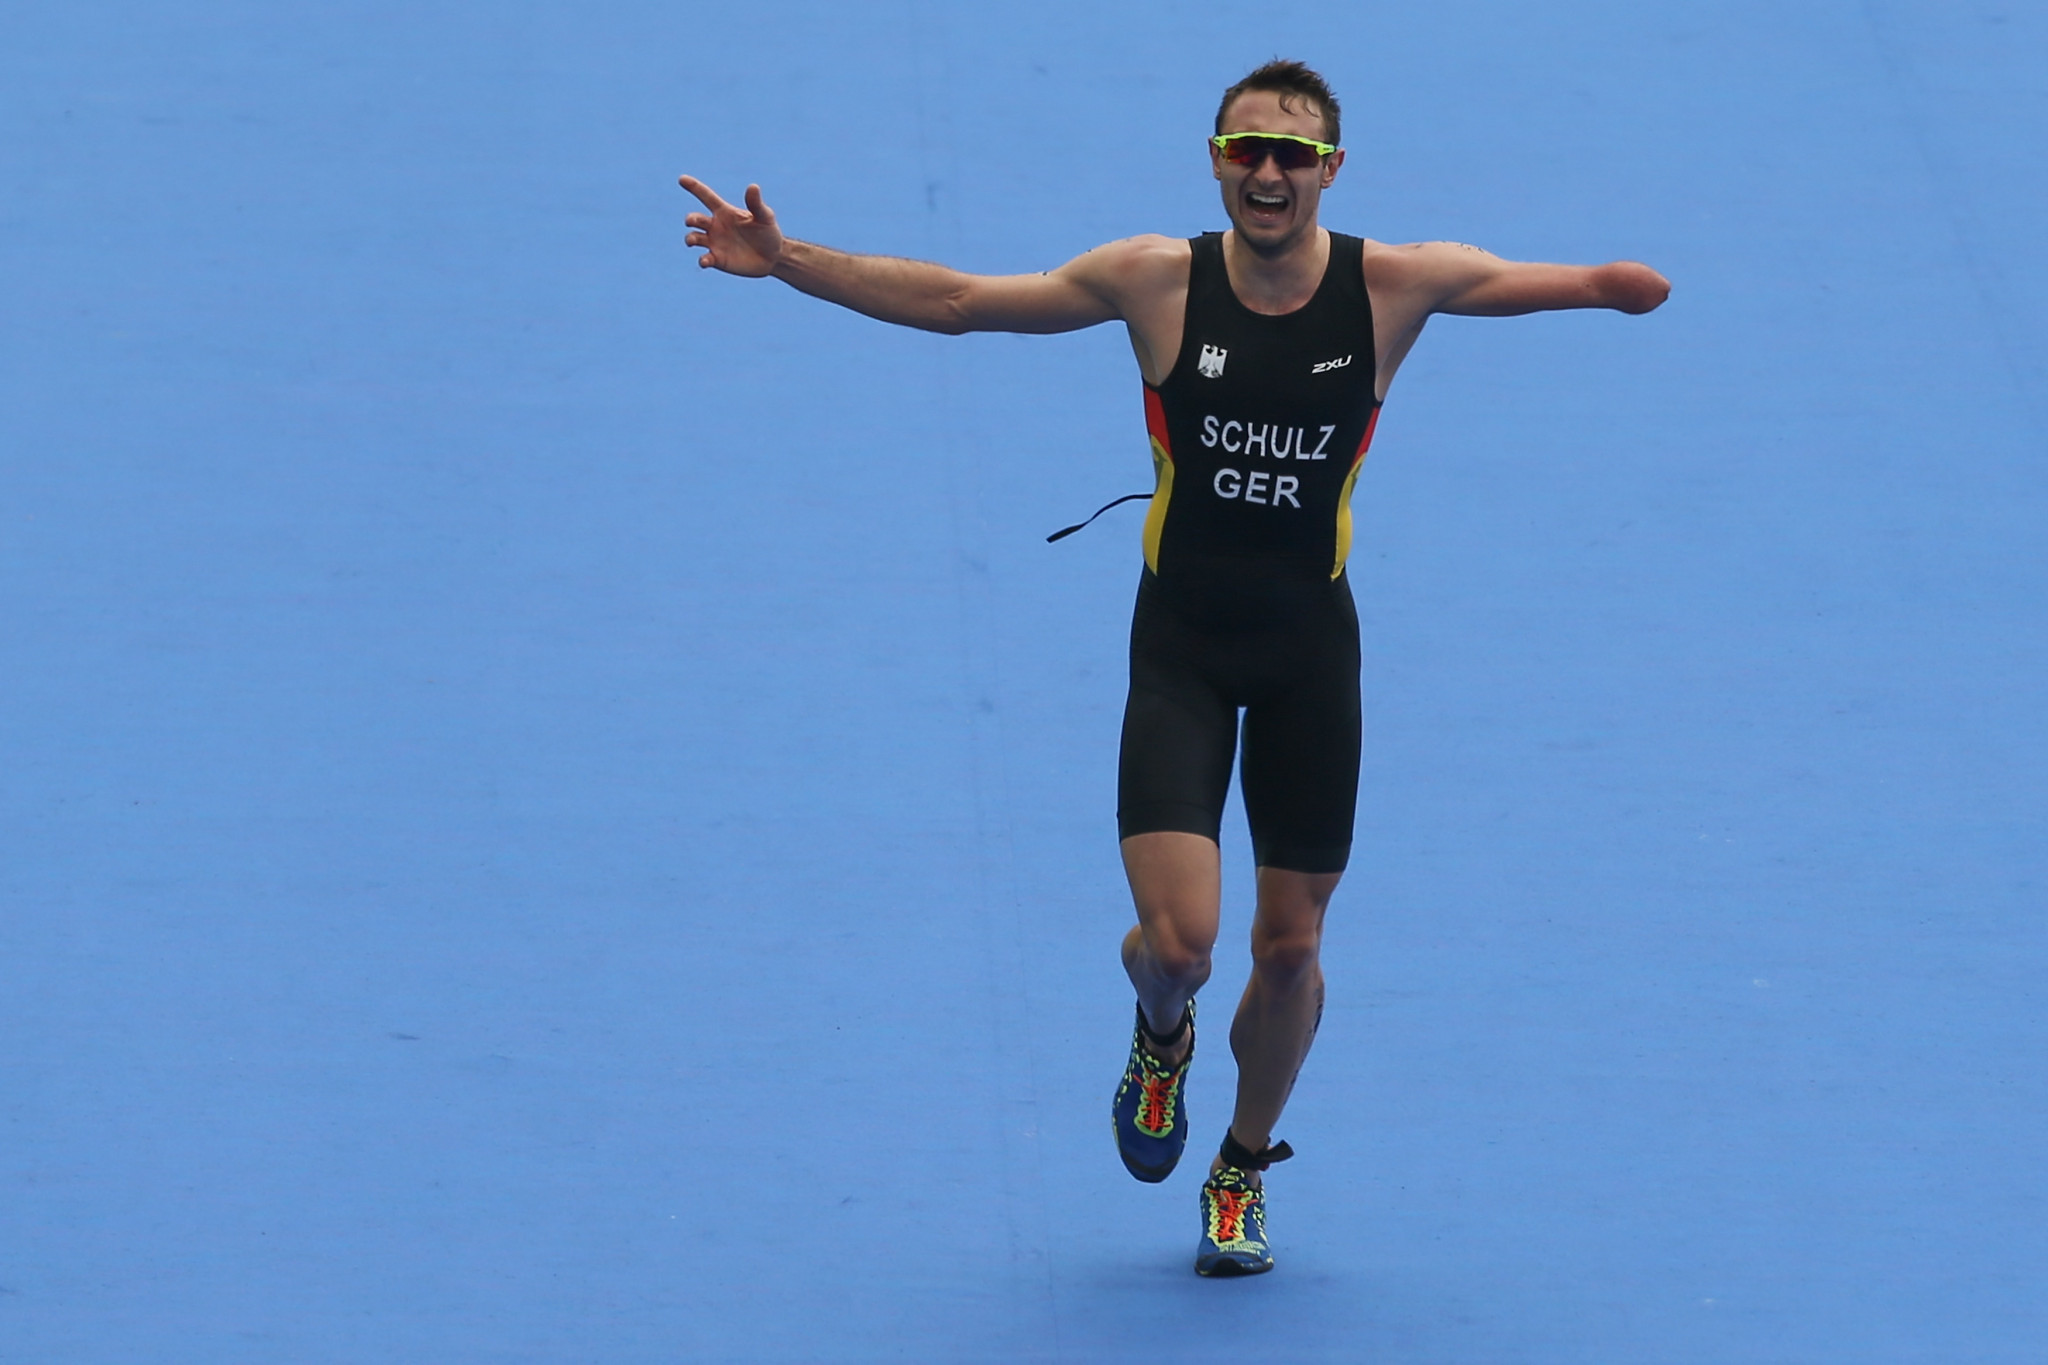 Germany’s Martin Schulz has said he is ready to go all-out attack when he competes in the men’s PTS5 category at the ITU Para-triathlon World Cup in Besancon in France tomorrow ©Getty Images